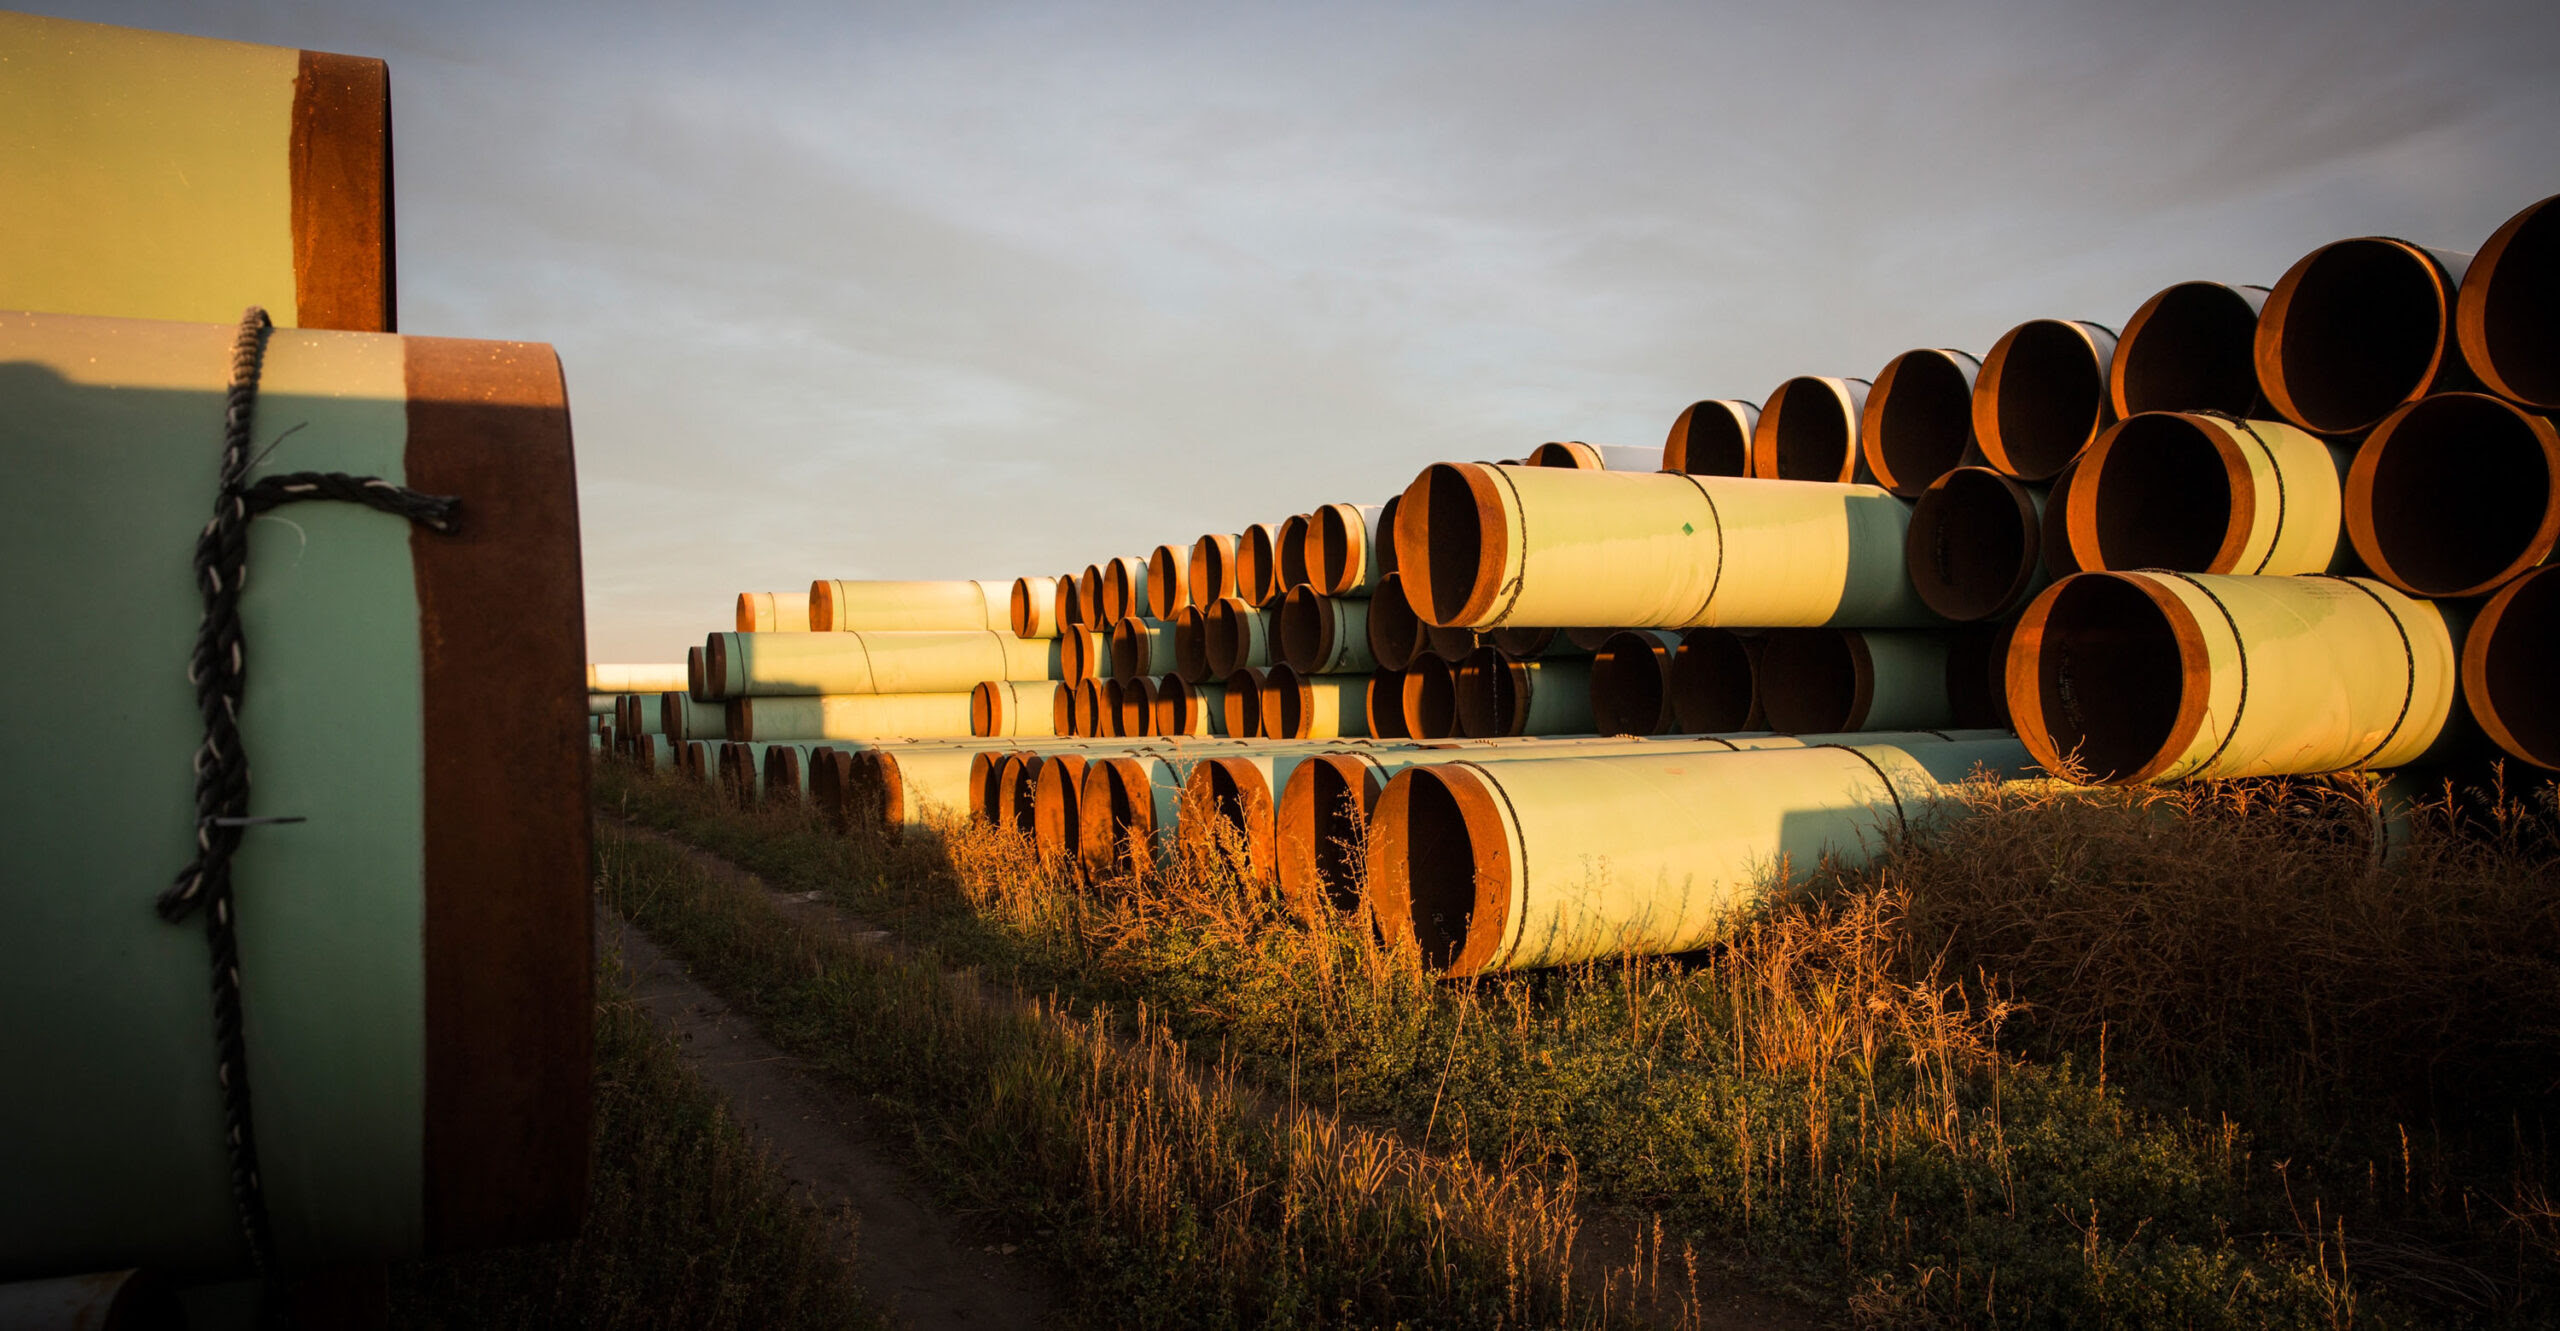 This Legal Hurdle Could Trip Up Biden’s Cancellation of Keystone XL Pipeline